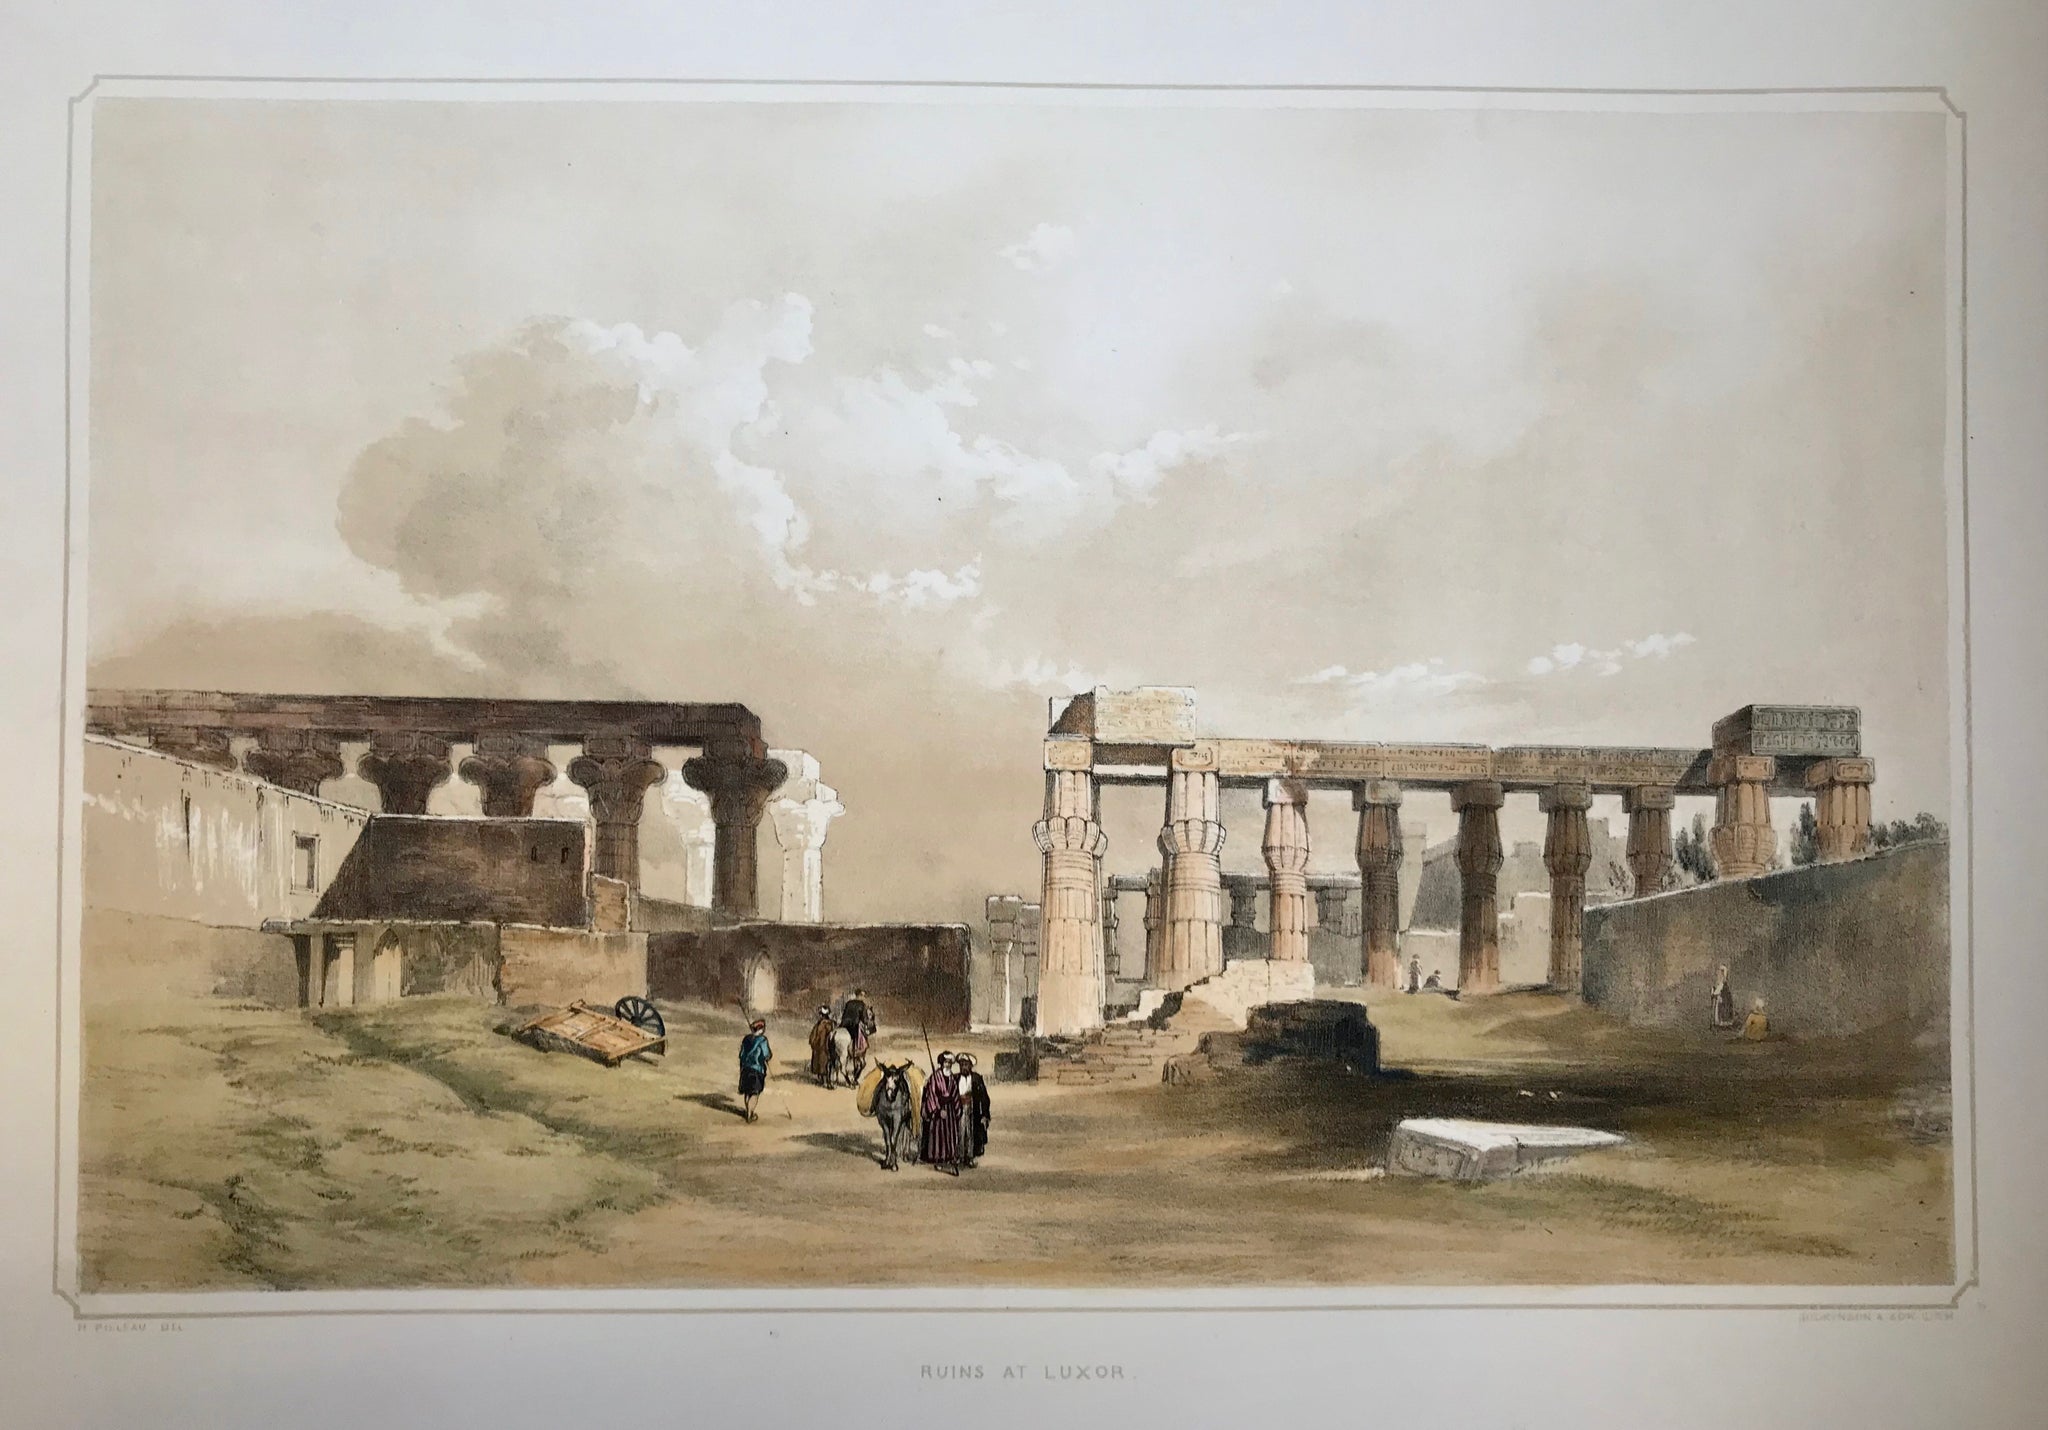 "Ruins at Luxor"  Type of print: Lithograph  Color: Toned and Hand-colored  Artist: Henry Pilleau (1813-1899)  Lithographed by: Dickinson & Son  Where: London  When: 1845